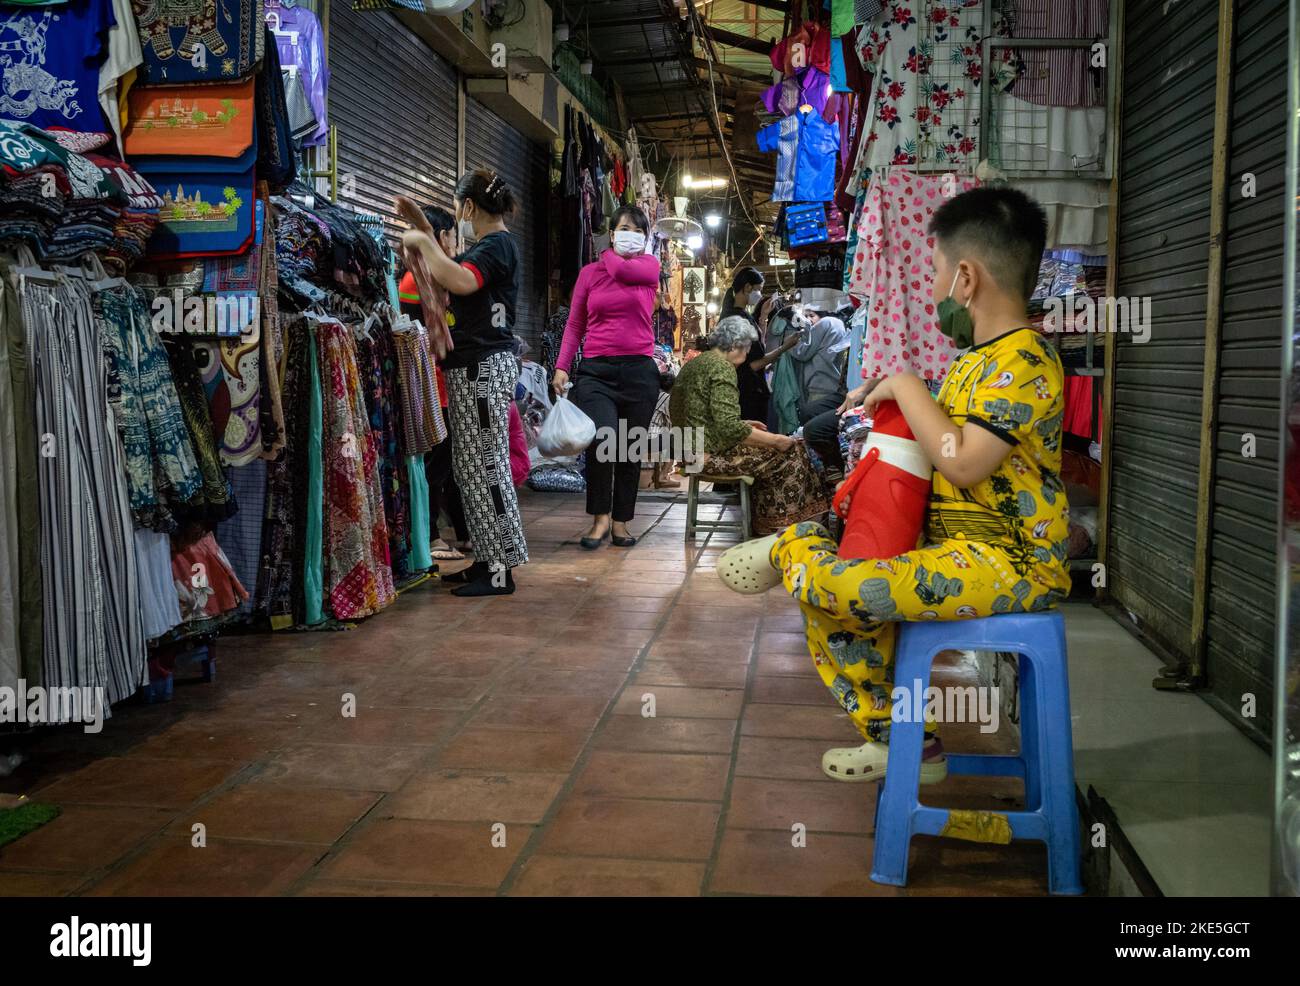 A young boy dressed in yellow pjamas sits on a stool in an alleyway within the Russian Market in Phnom Penh, Cambodia. Stock Photo